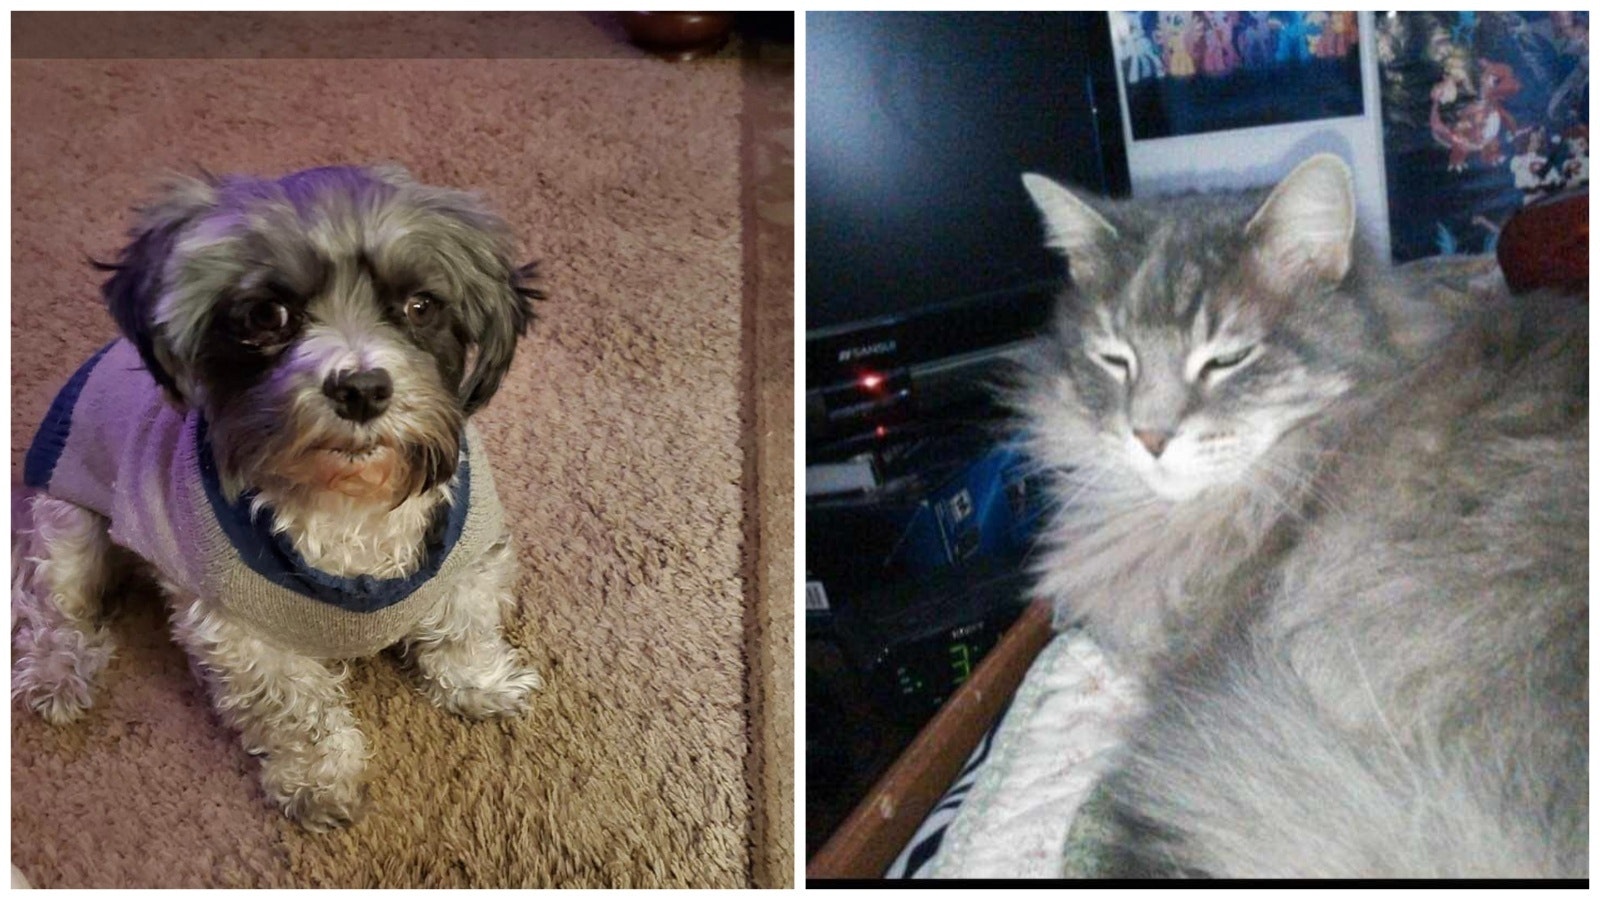 The owner of a Sheridan home destroyed during the course of a long standoff with police and an armed suspect says two of her pets Willy, left, and Cersei are still missing.